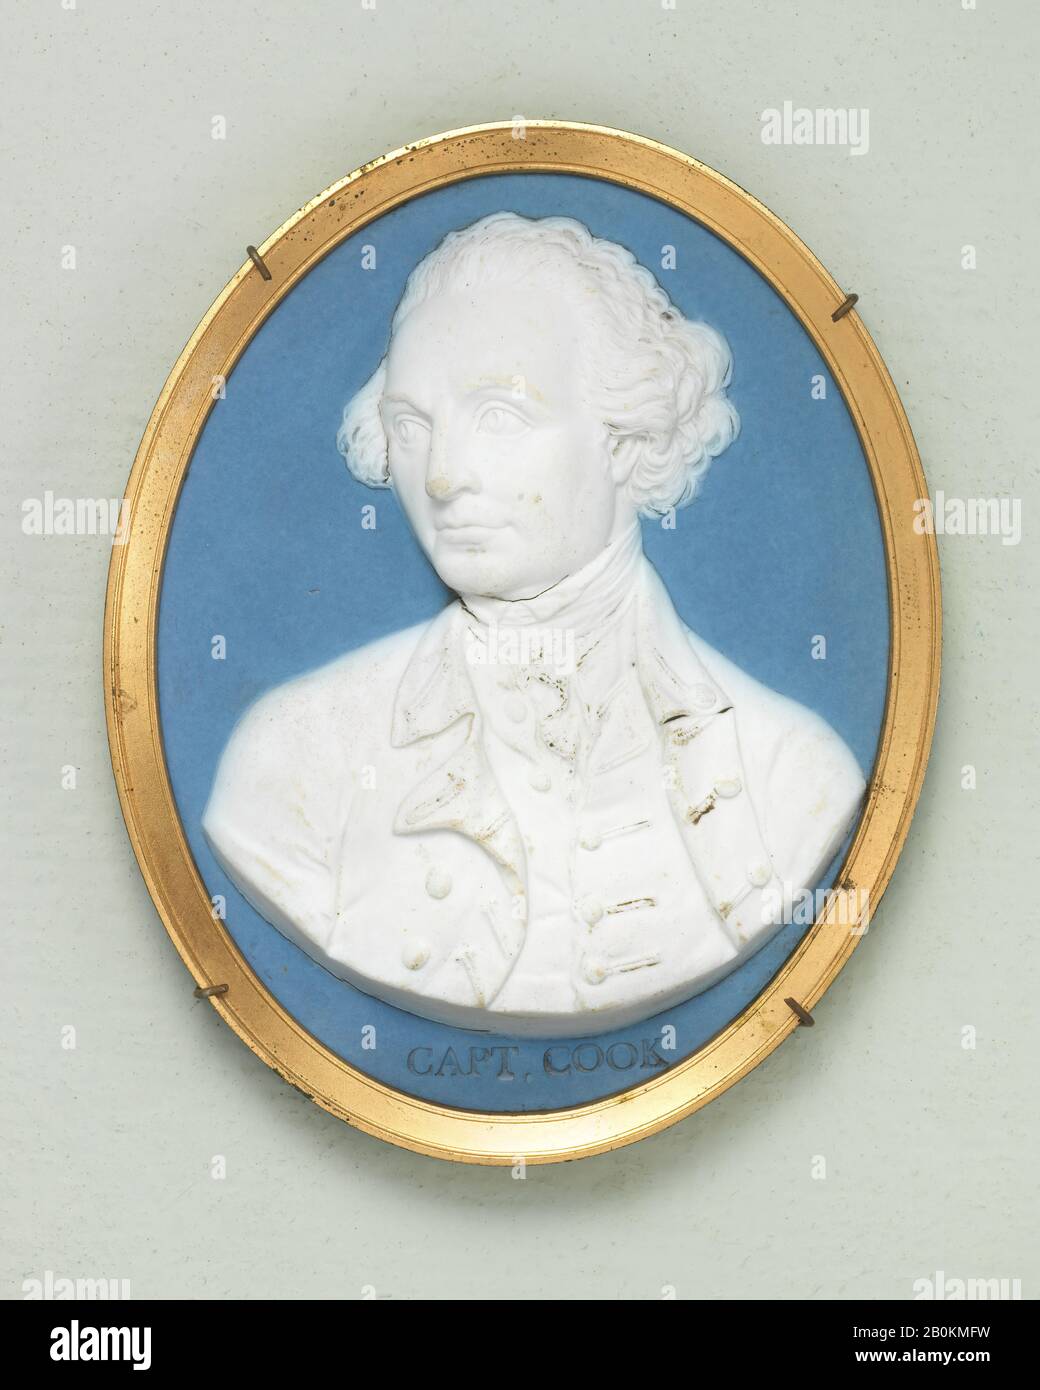 Wedgwood and Bentley, Captain James Cook, British, Etruria, Staffordshire, Wedgwood and Bentley (1769–1780), late 18th century, British, Etruria, Staffordshire, Jasperware, 3 3/8 × 2 5/8 in. (8.6 × 6.7 cm), Ceramics-Pottery Stock Photo